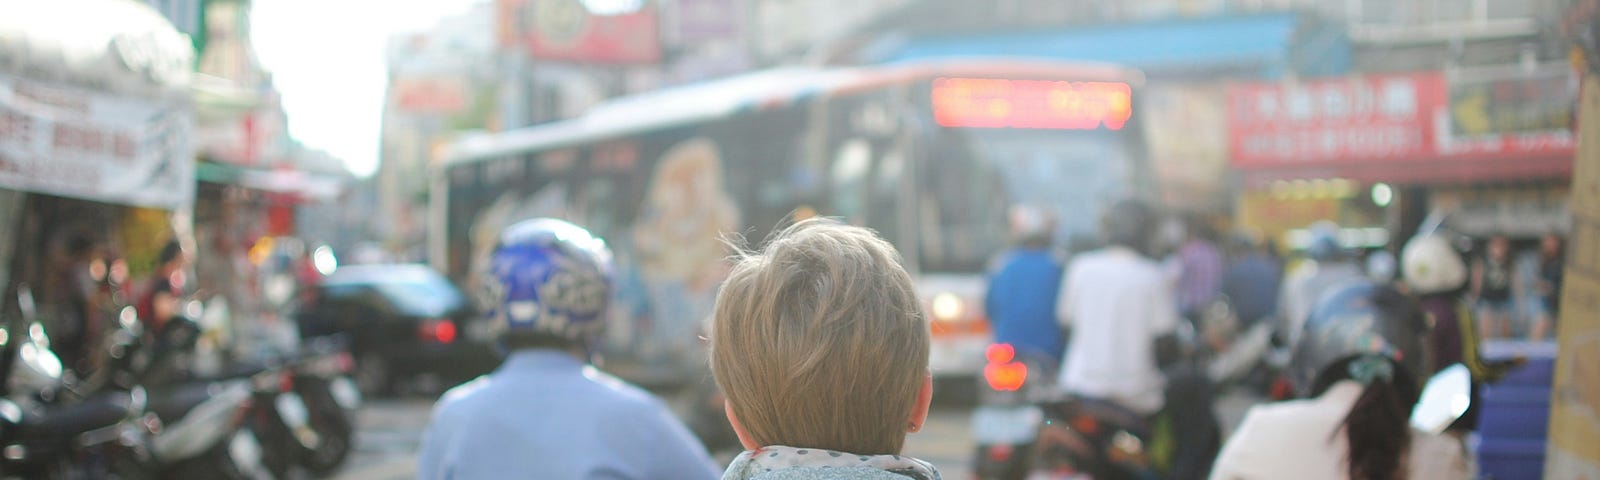 A person stands with their back to the camera, a small rucksack on their back, looking out at a chaotic city road junction full of mopeds and buses